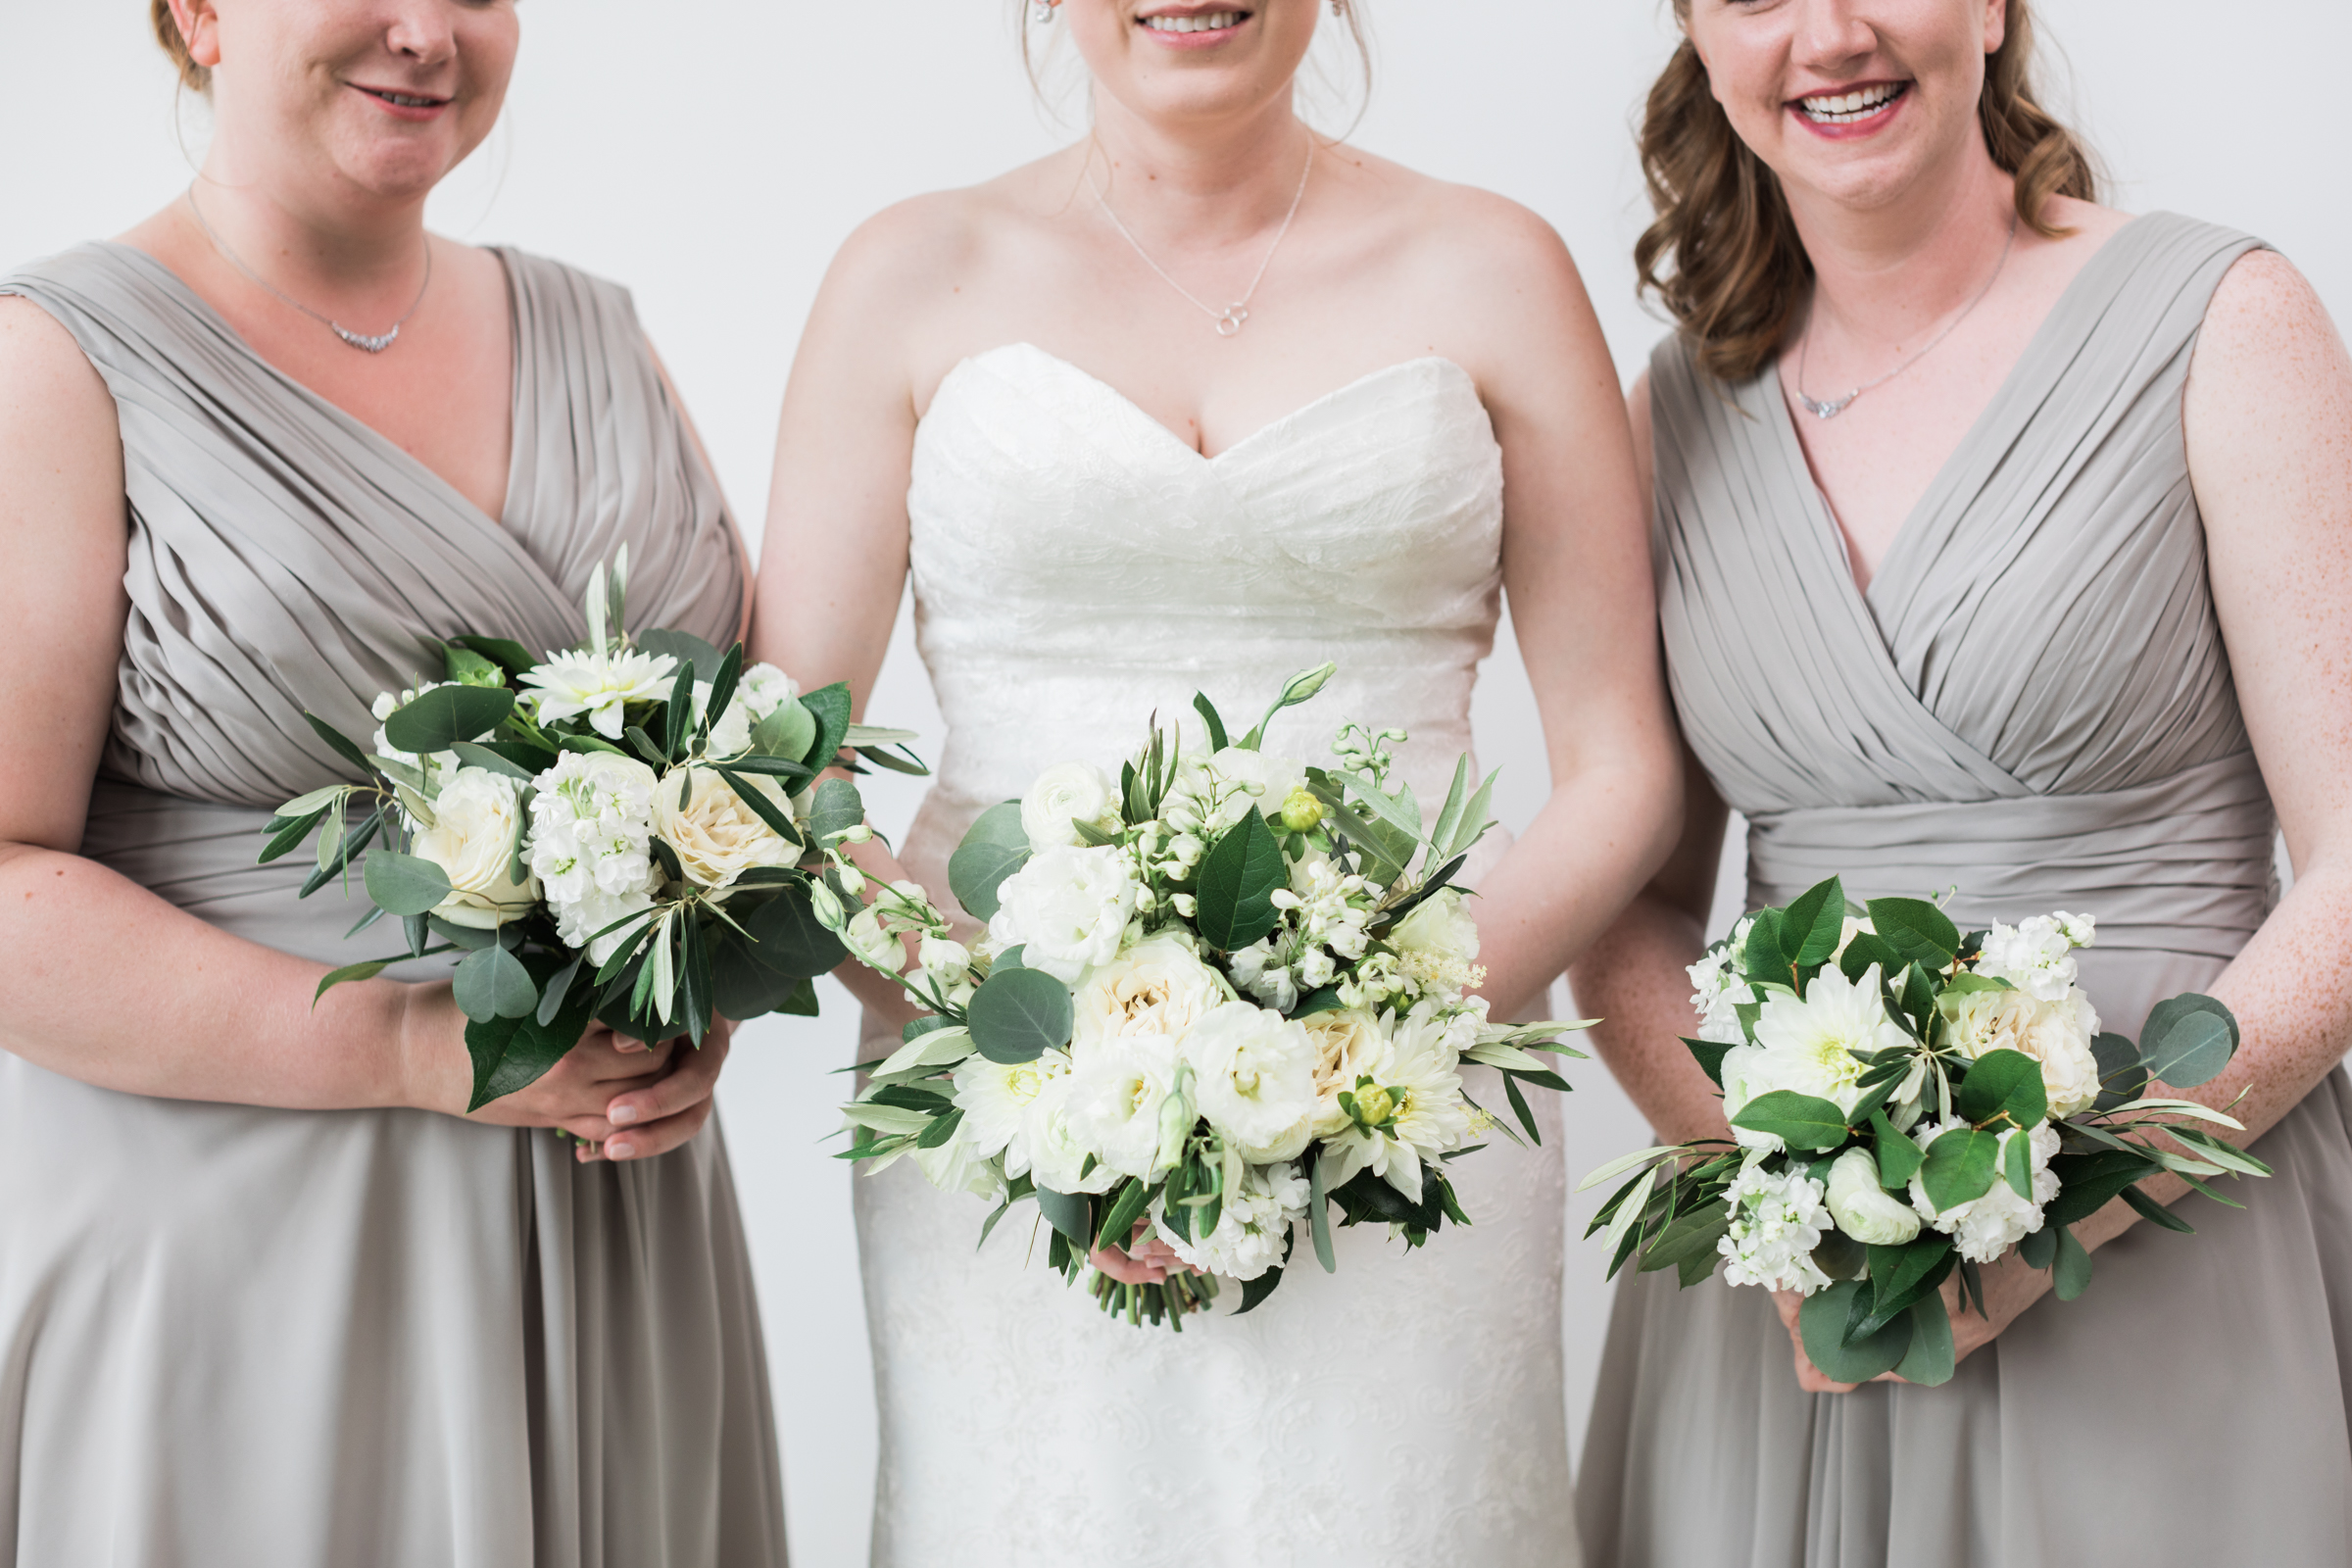 Bride and bridesmaids in pale grey dresses for minimalist monochromatic wedding with white dahlias, ranunculus, roses, and eucalyptus.